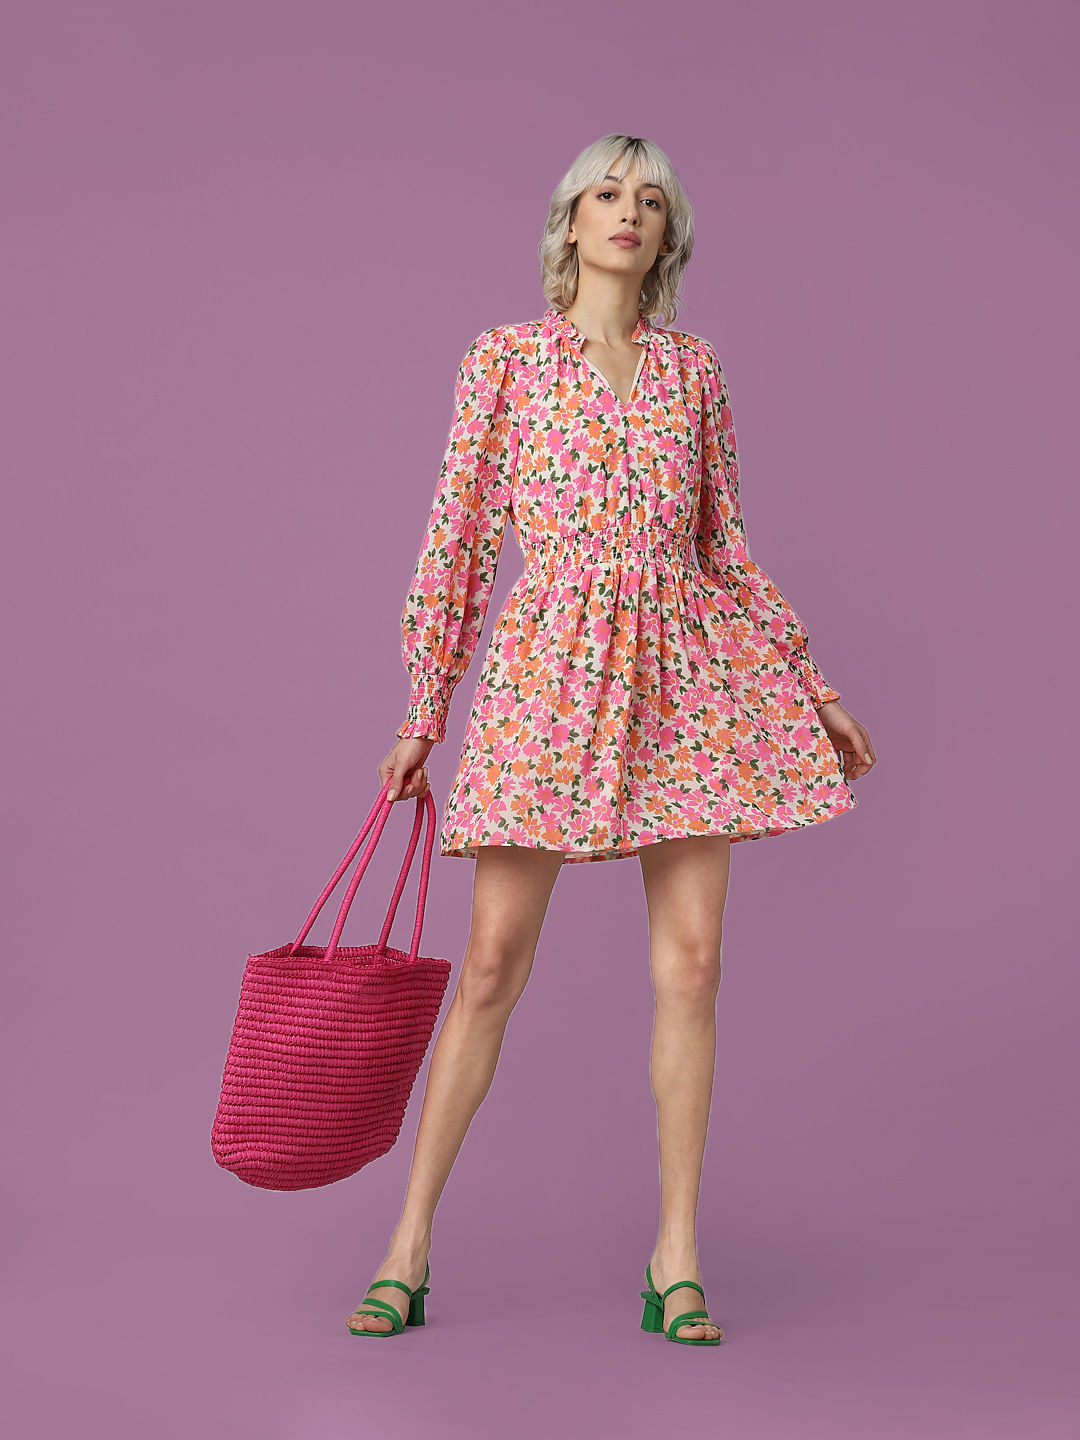 Charms Dress - Pink Floral – Thats So Fetch US